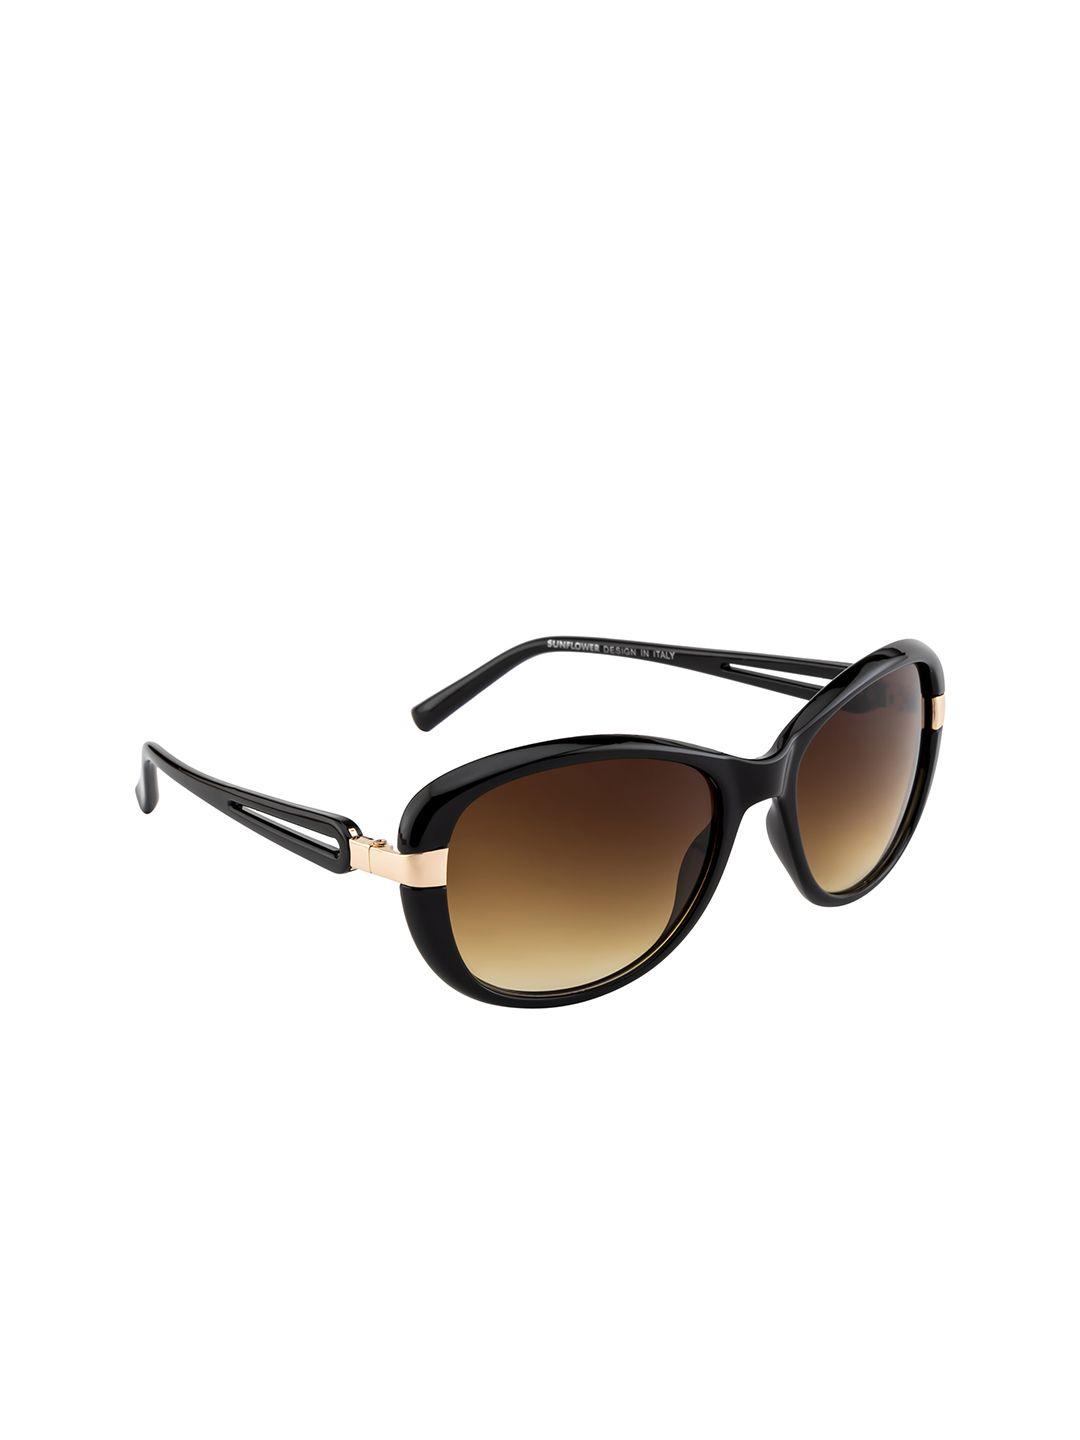 dressberry women brown lens & black oval sunglasses with uv protected lens db-p8560-c6